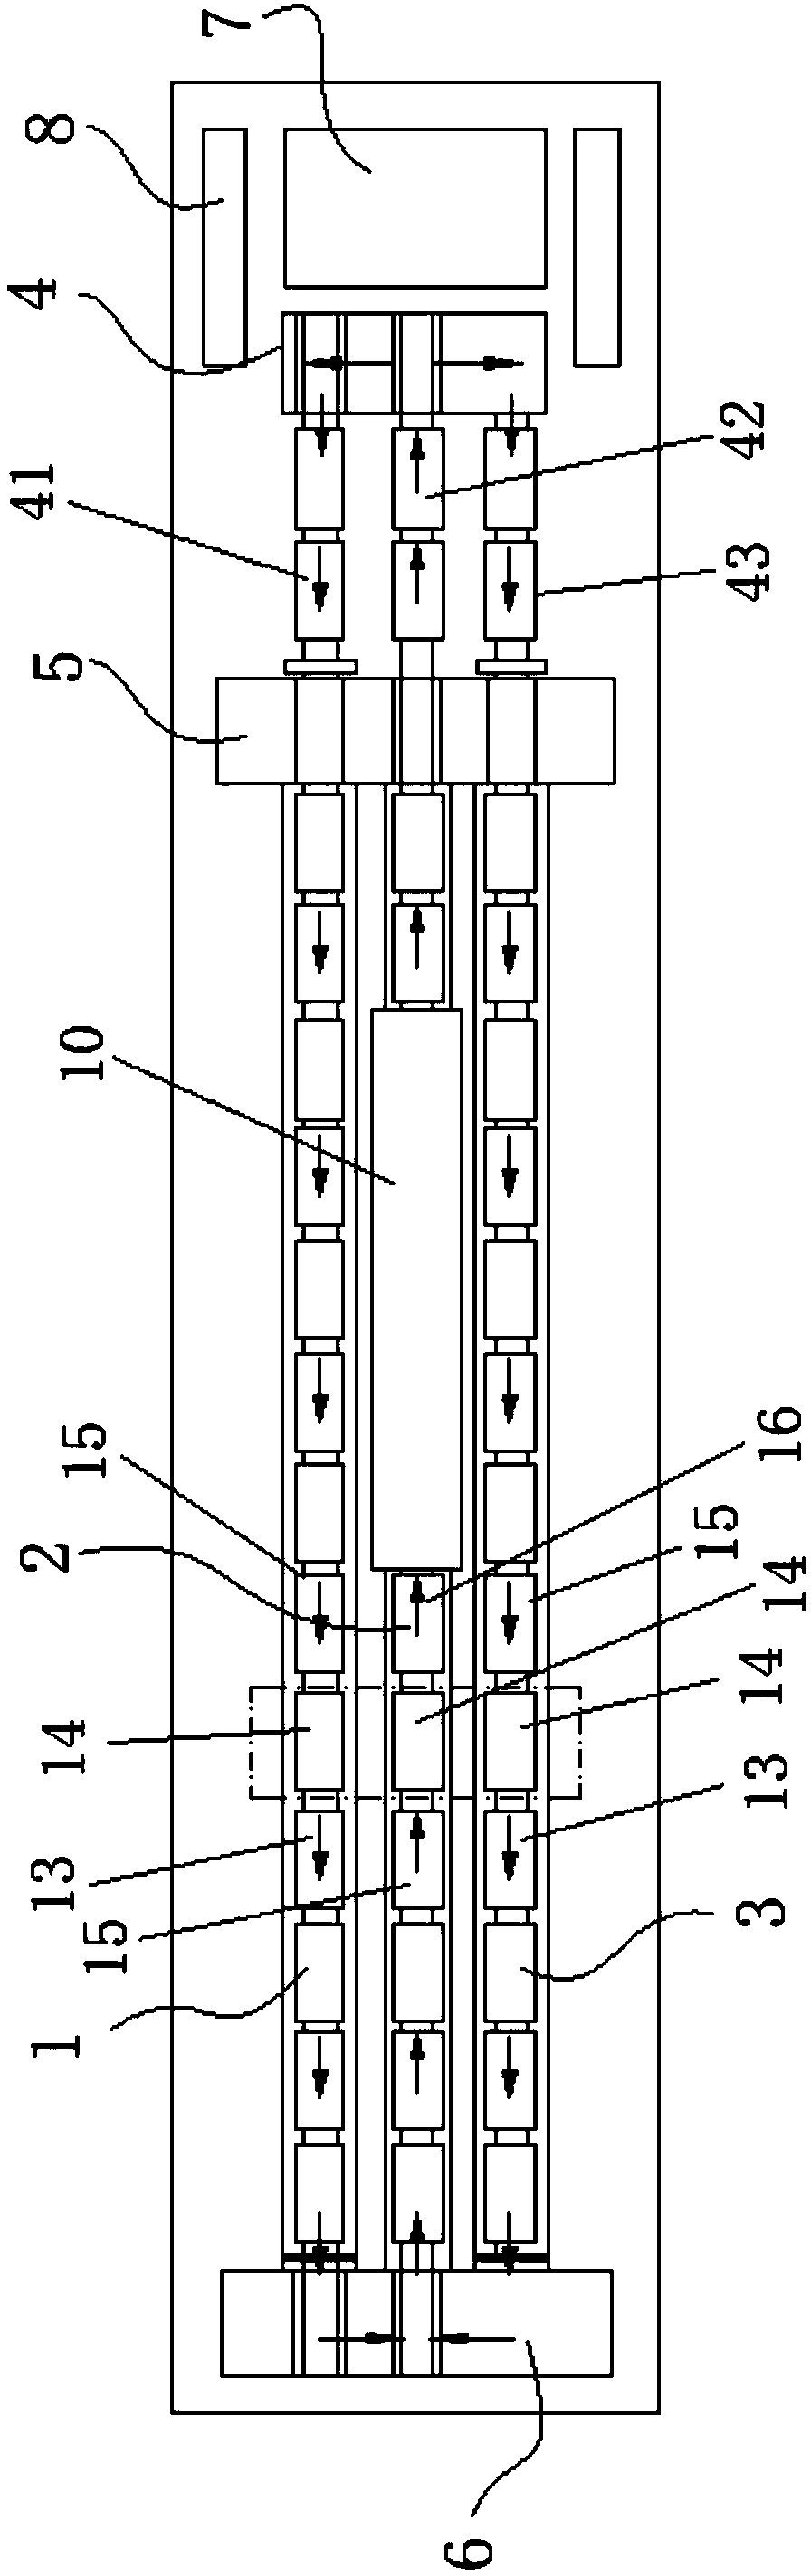 Three-dimensional production system for prefabricated components